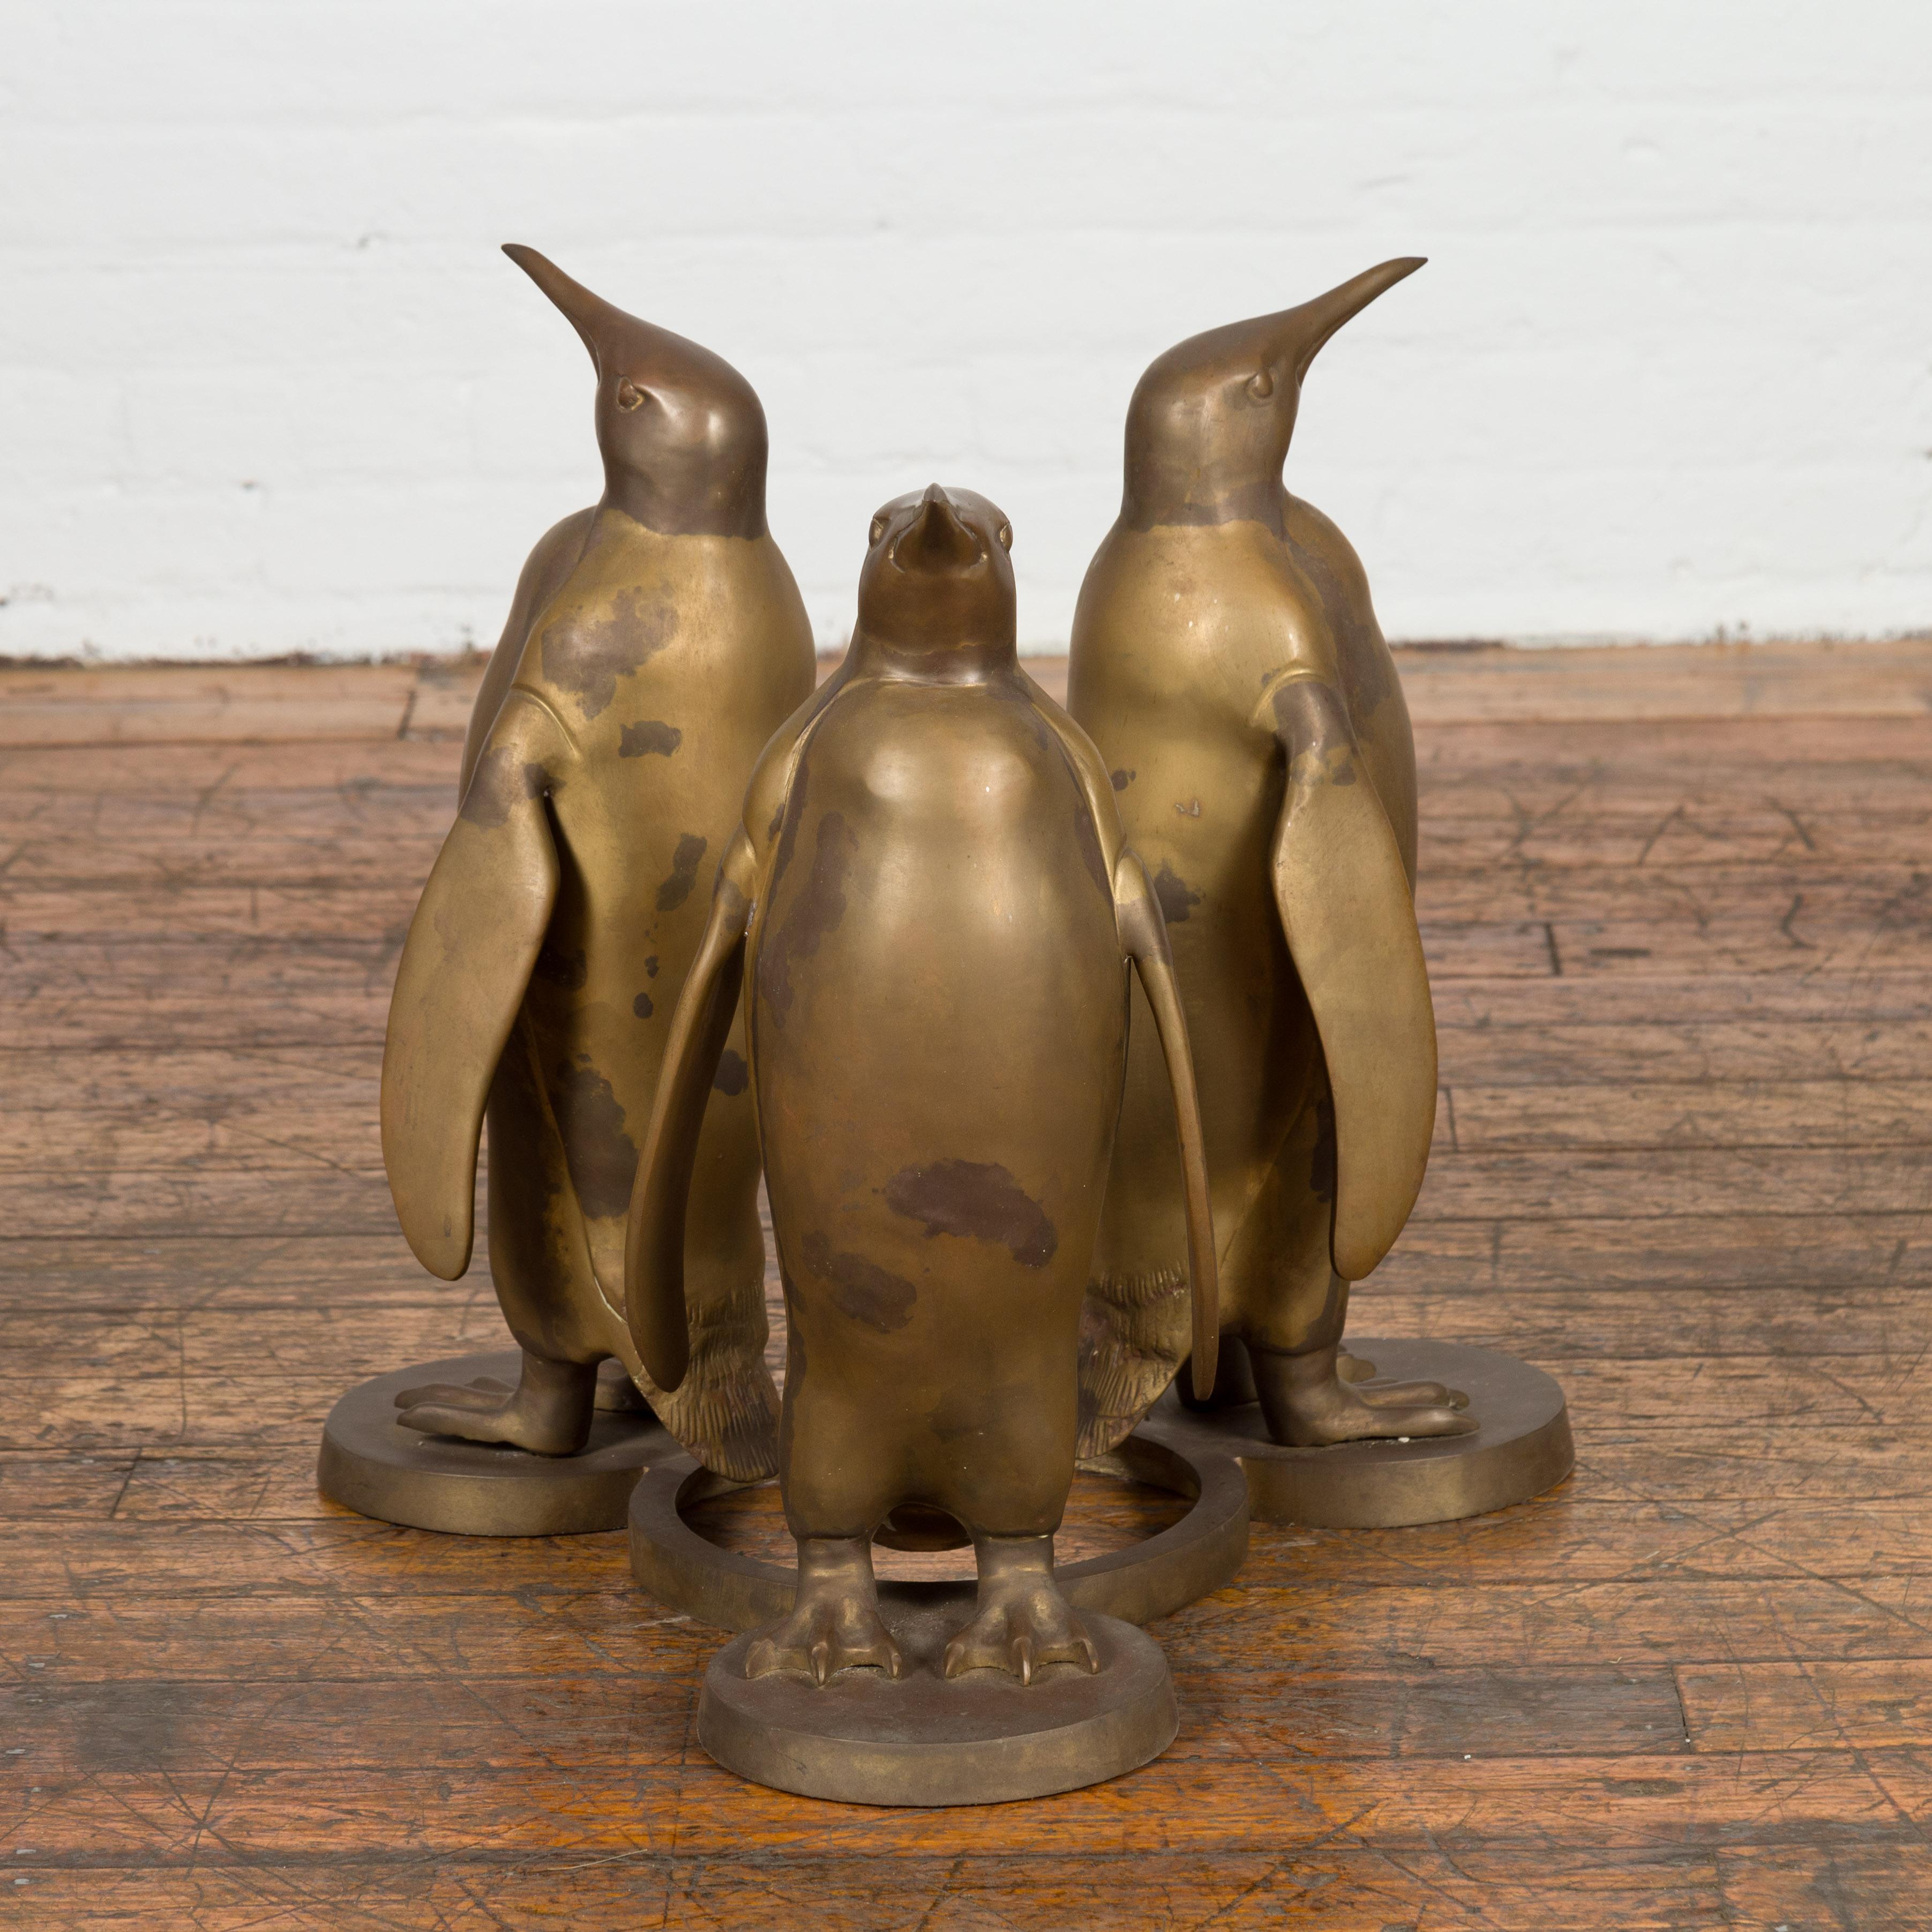 A bronze animal sculpted ground depicting three penguins depicted back to back, in gold patina. This vintage bronze sculpture captivates with its masterful portrayal of three penguins, meticulously sculpted back-to-back in a unified stance. The